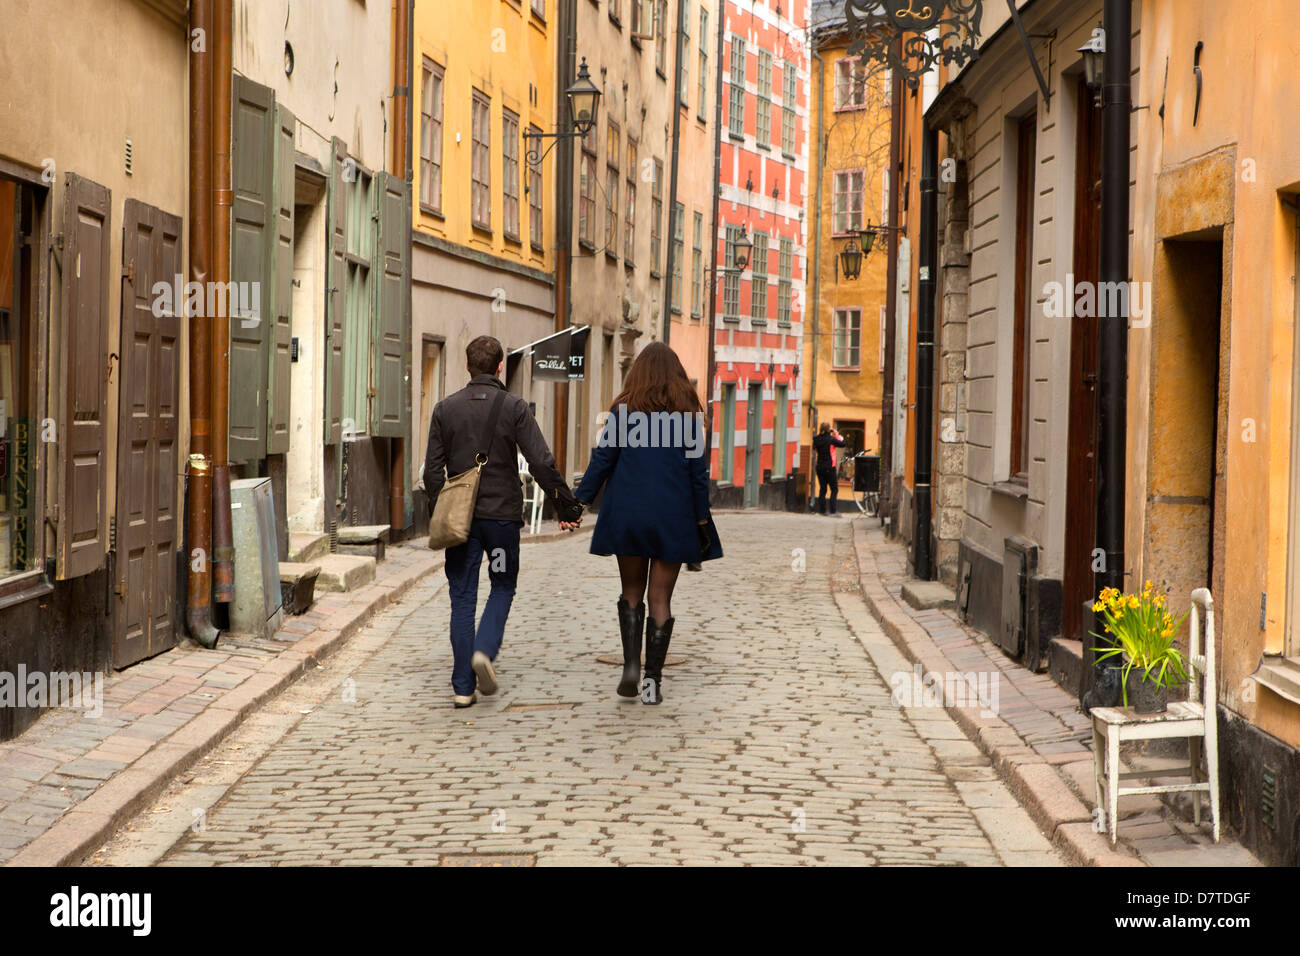 The Old Town, (Gamla Stan) Stockholm, Sweden. Stock Photo